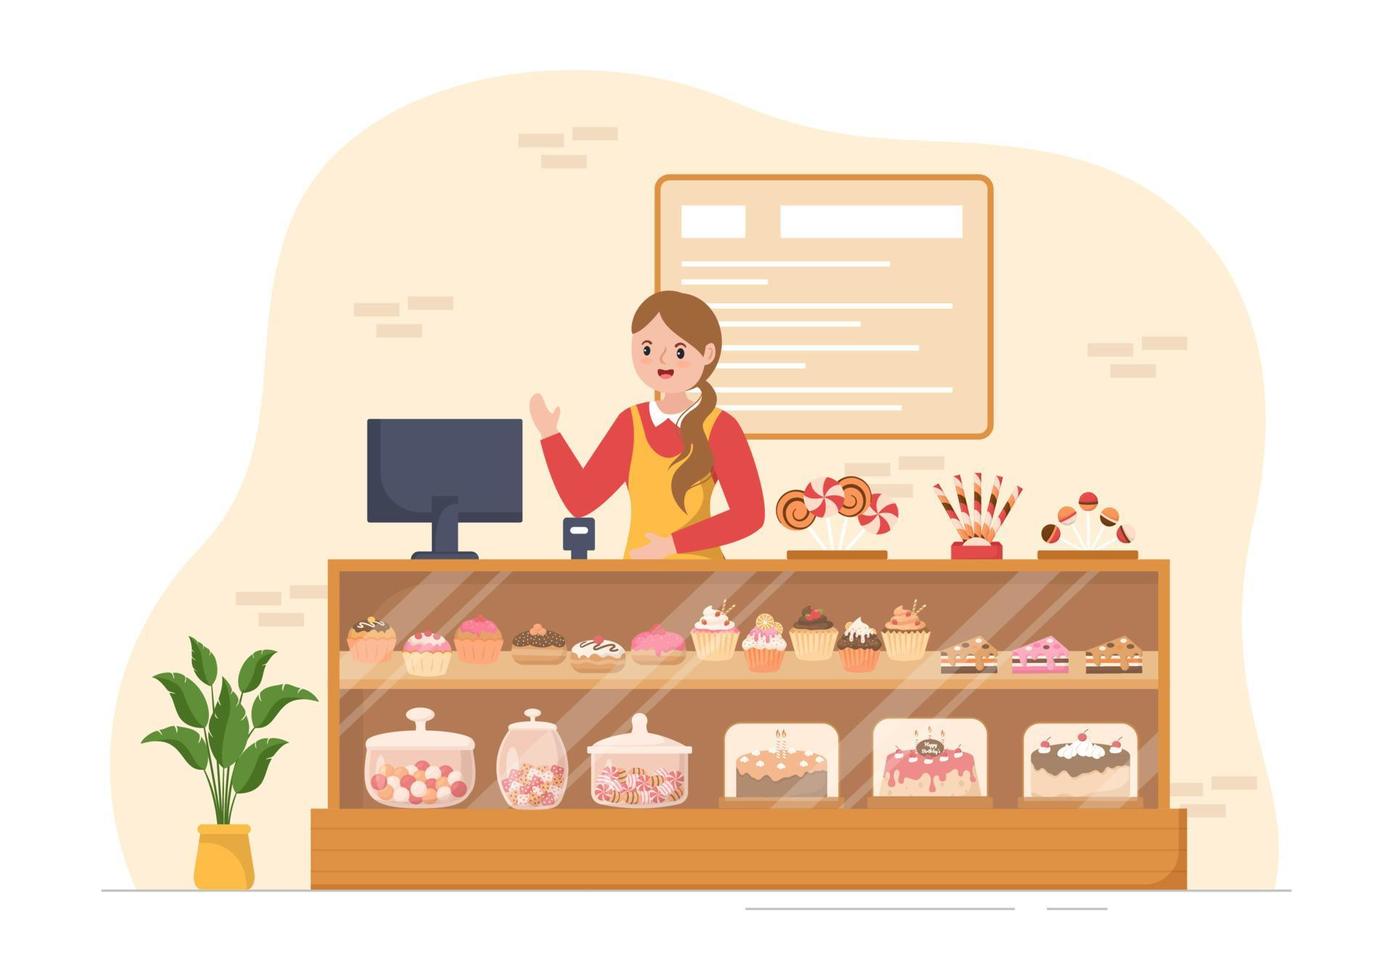 Sweet Shop Selling Various Bakery Products, Cupcake, Cake, Pastry or Candy on Flat Cartoon style Hand Drawn Templates Illustration vector